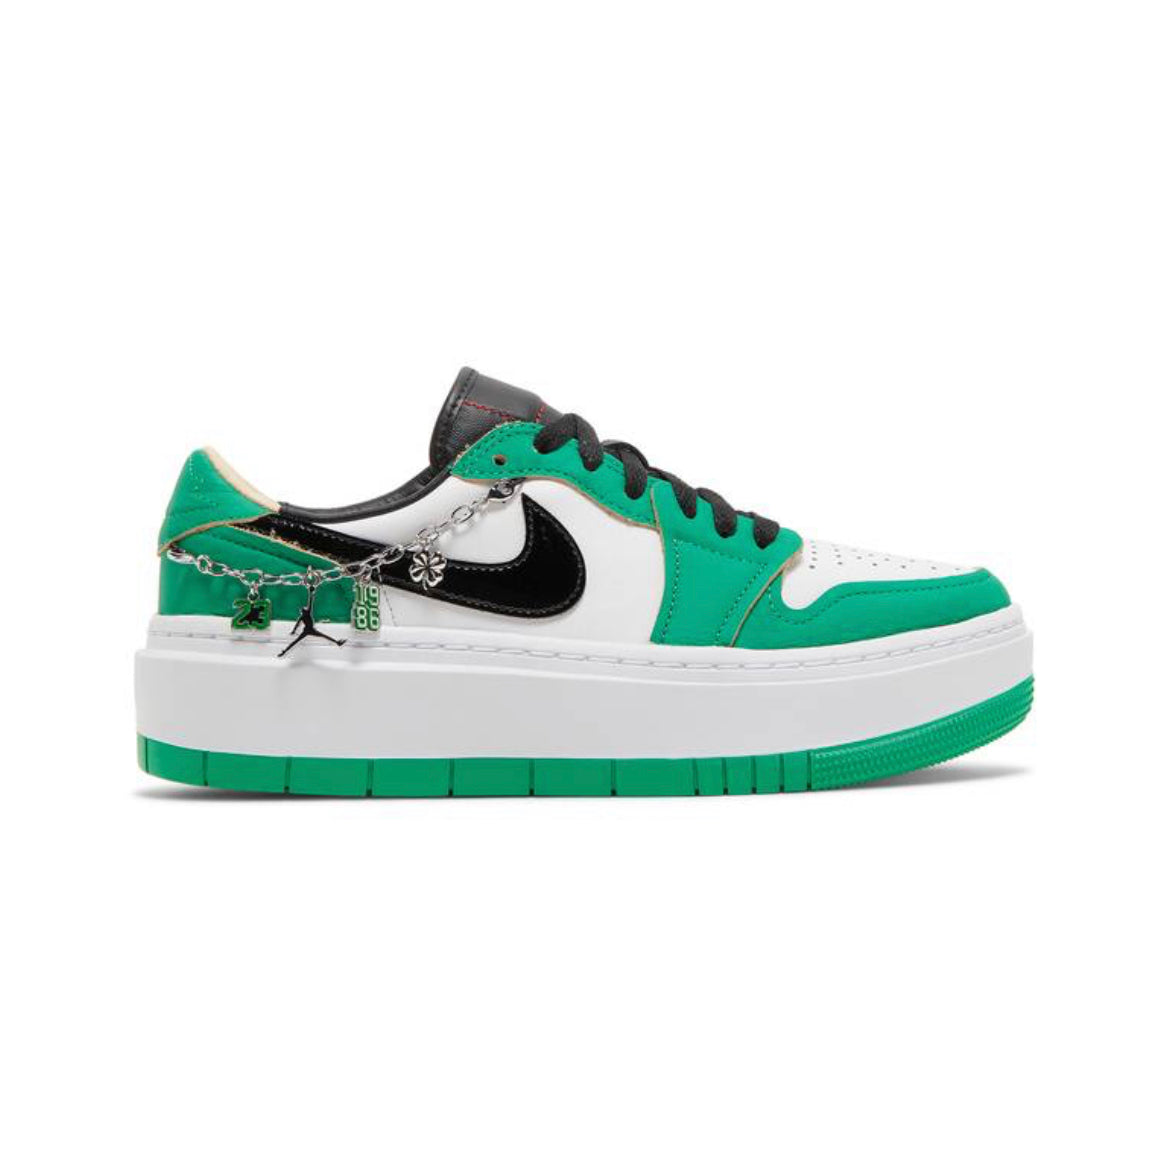 AJ1 Low Elevate ‘Lucky Green’ (W) DQ8394-301